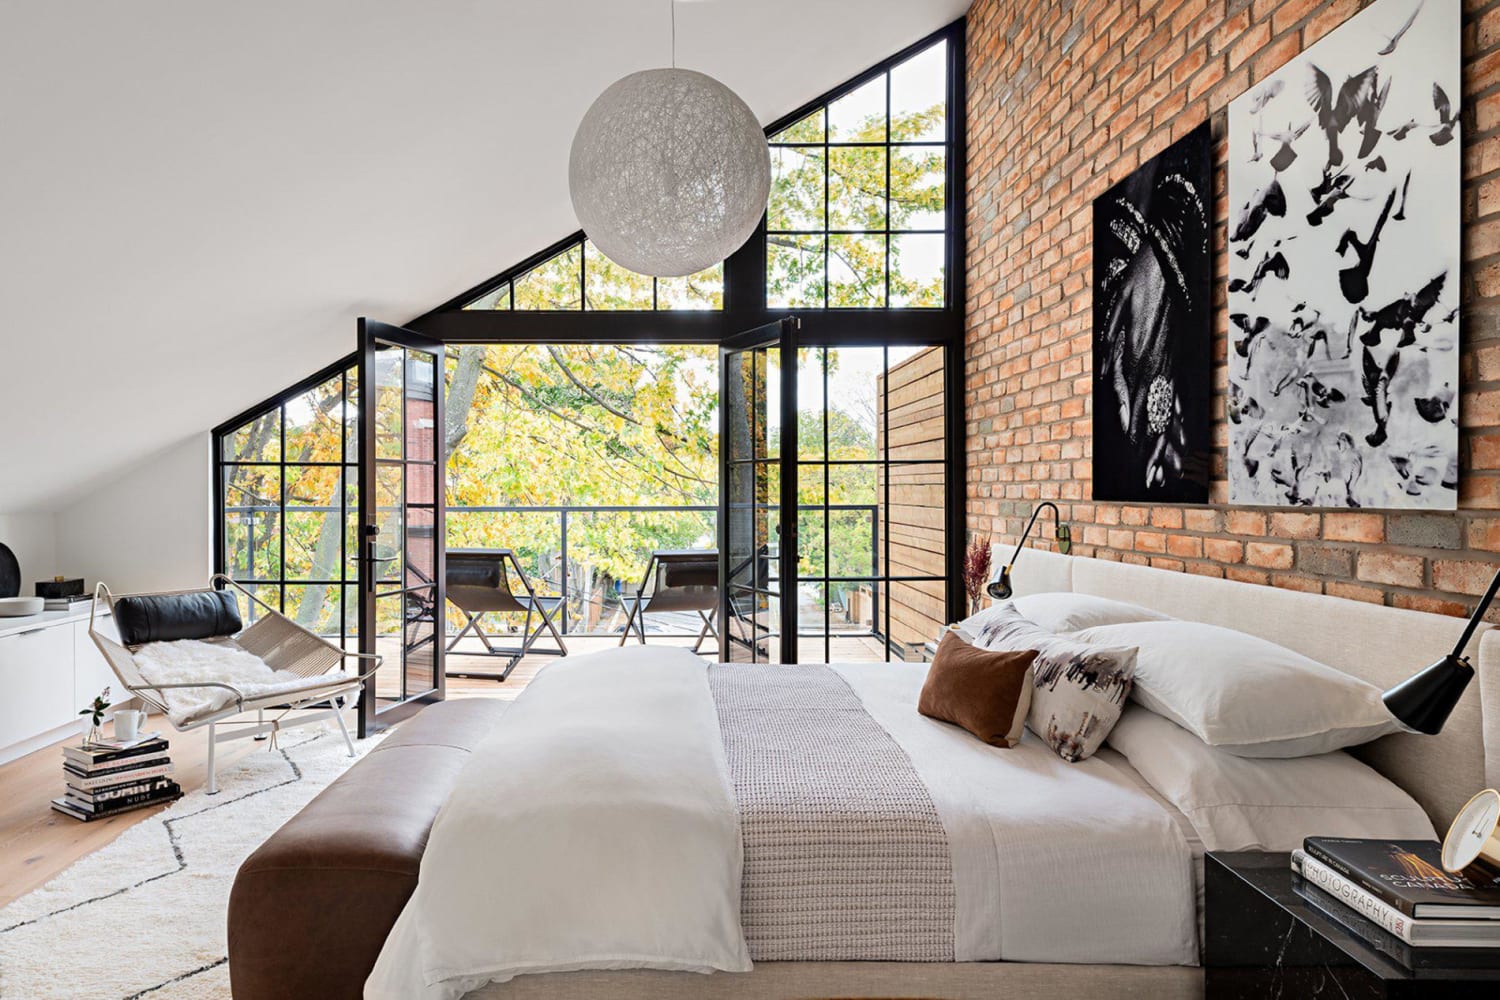 Bedroom with angled roof and exposed brickwork in a narrow semi-detached home, Toronto, Canada by Ancerl Studio (Photo: Gillian Jackson)